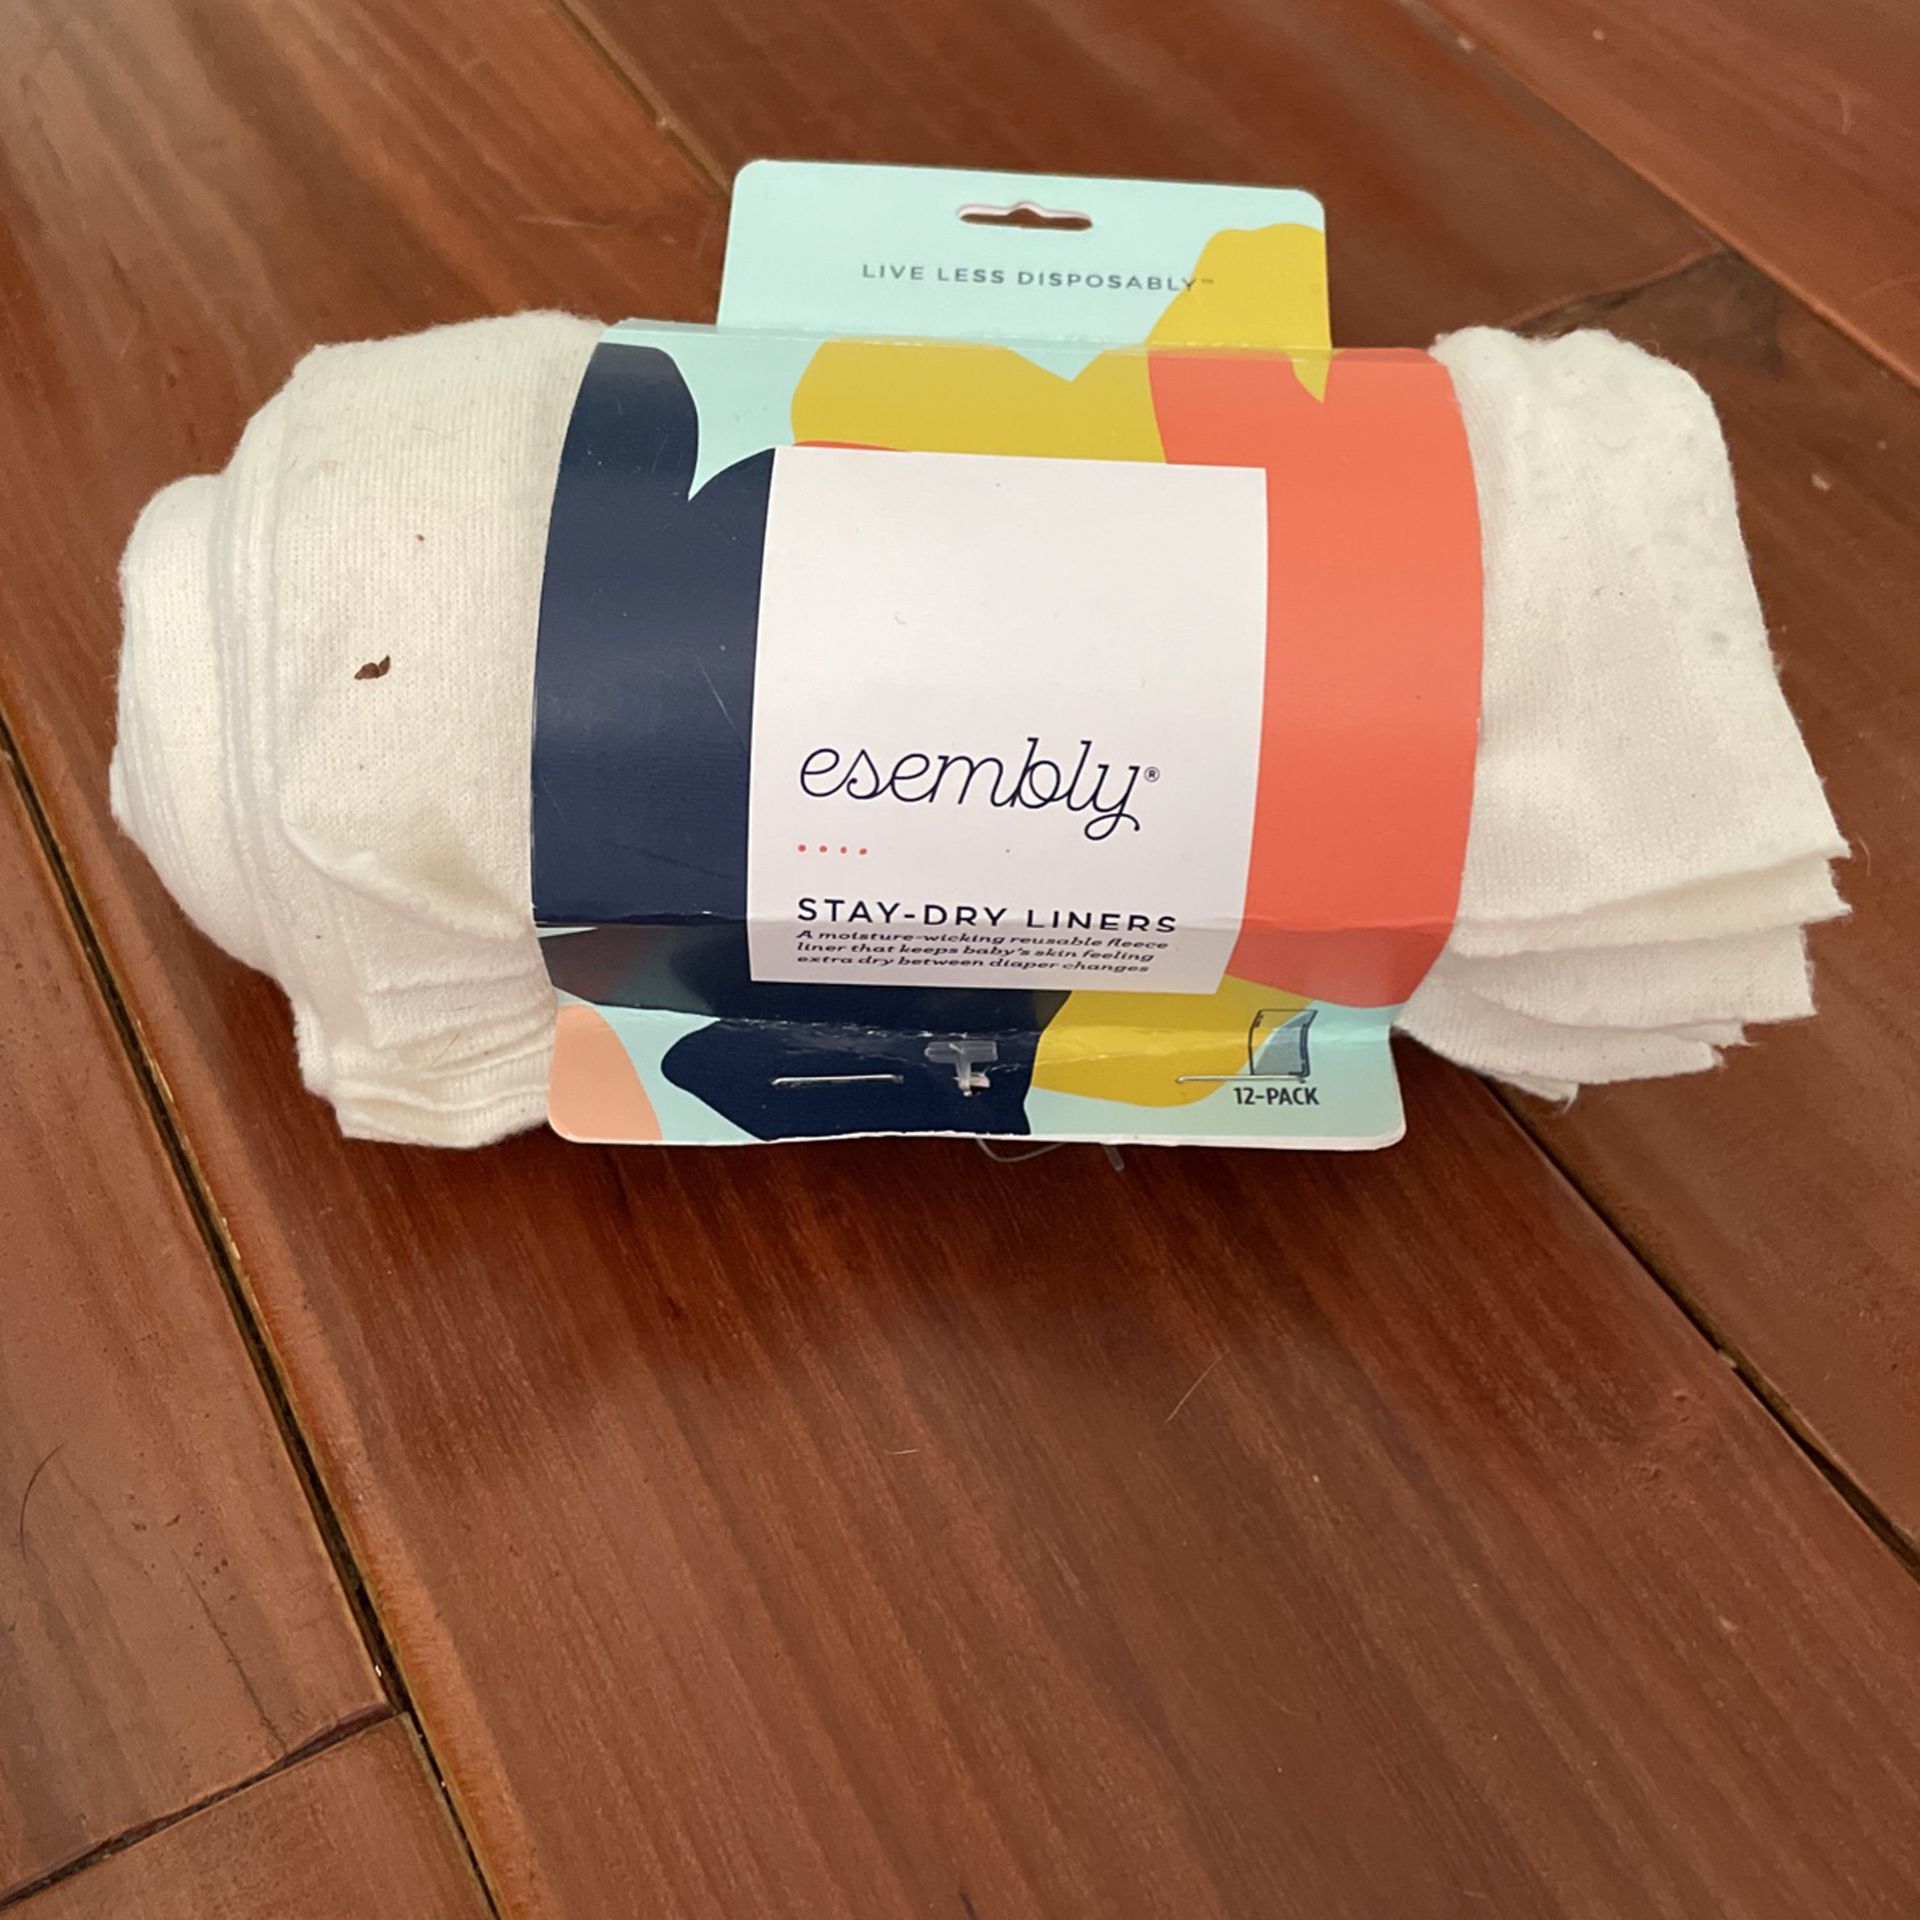 Esembly Stay-dry Liners